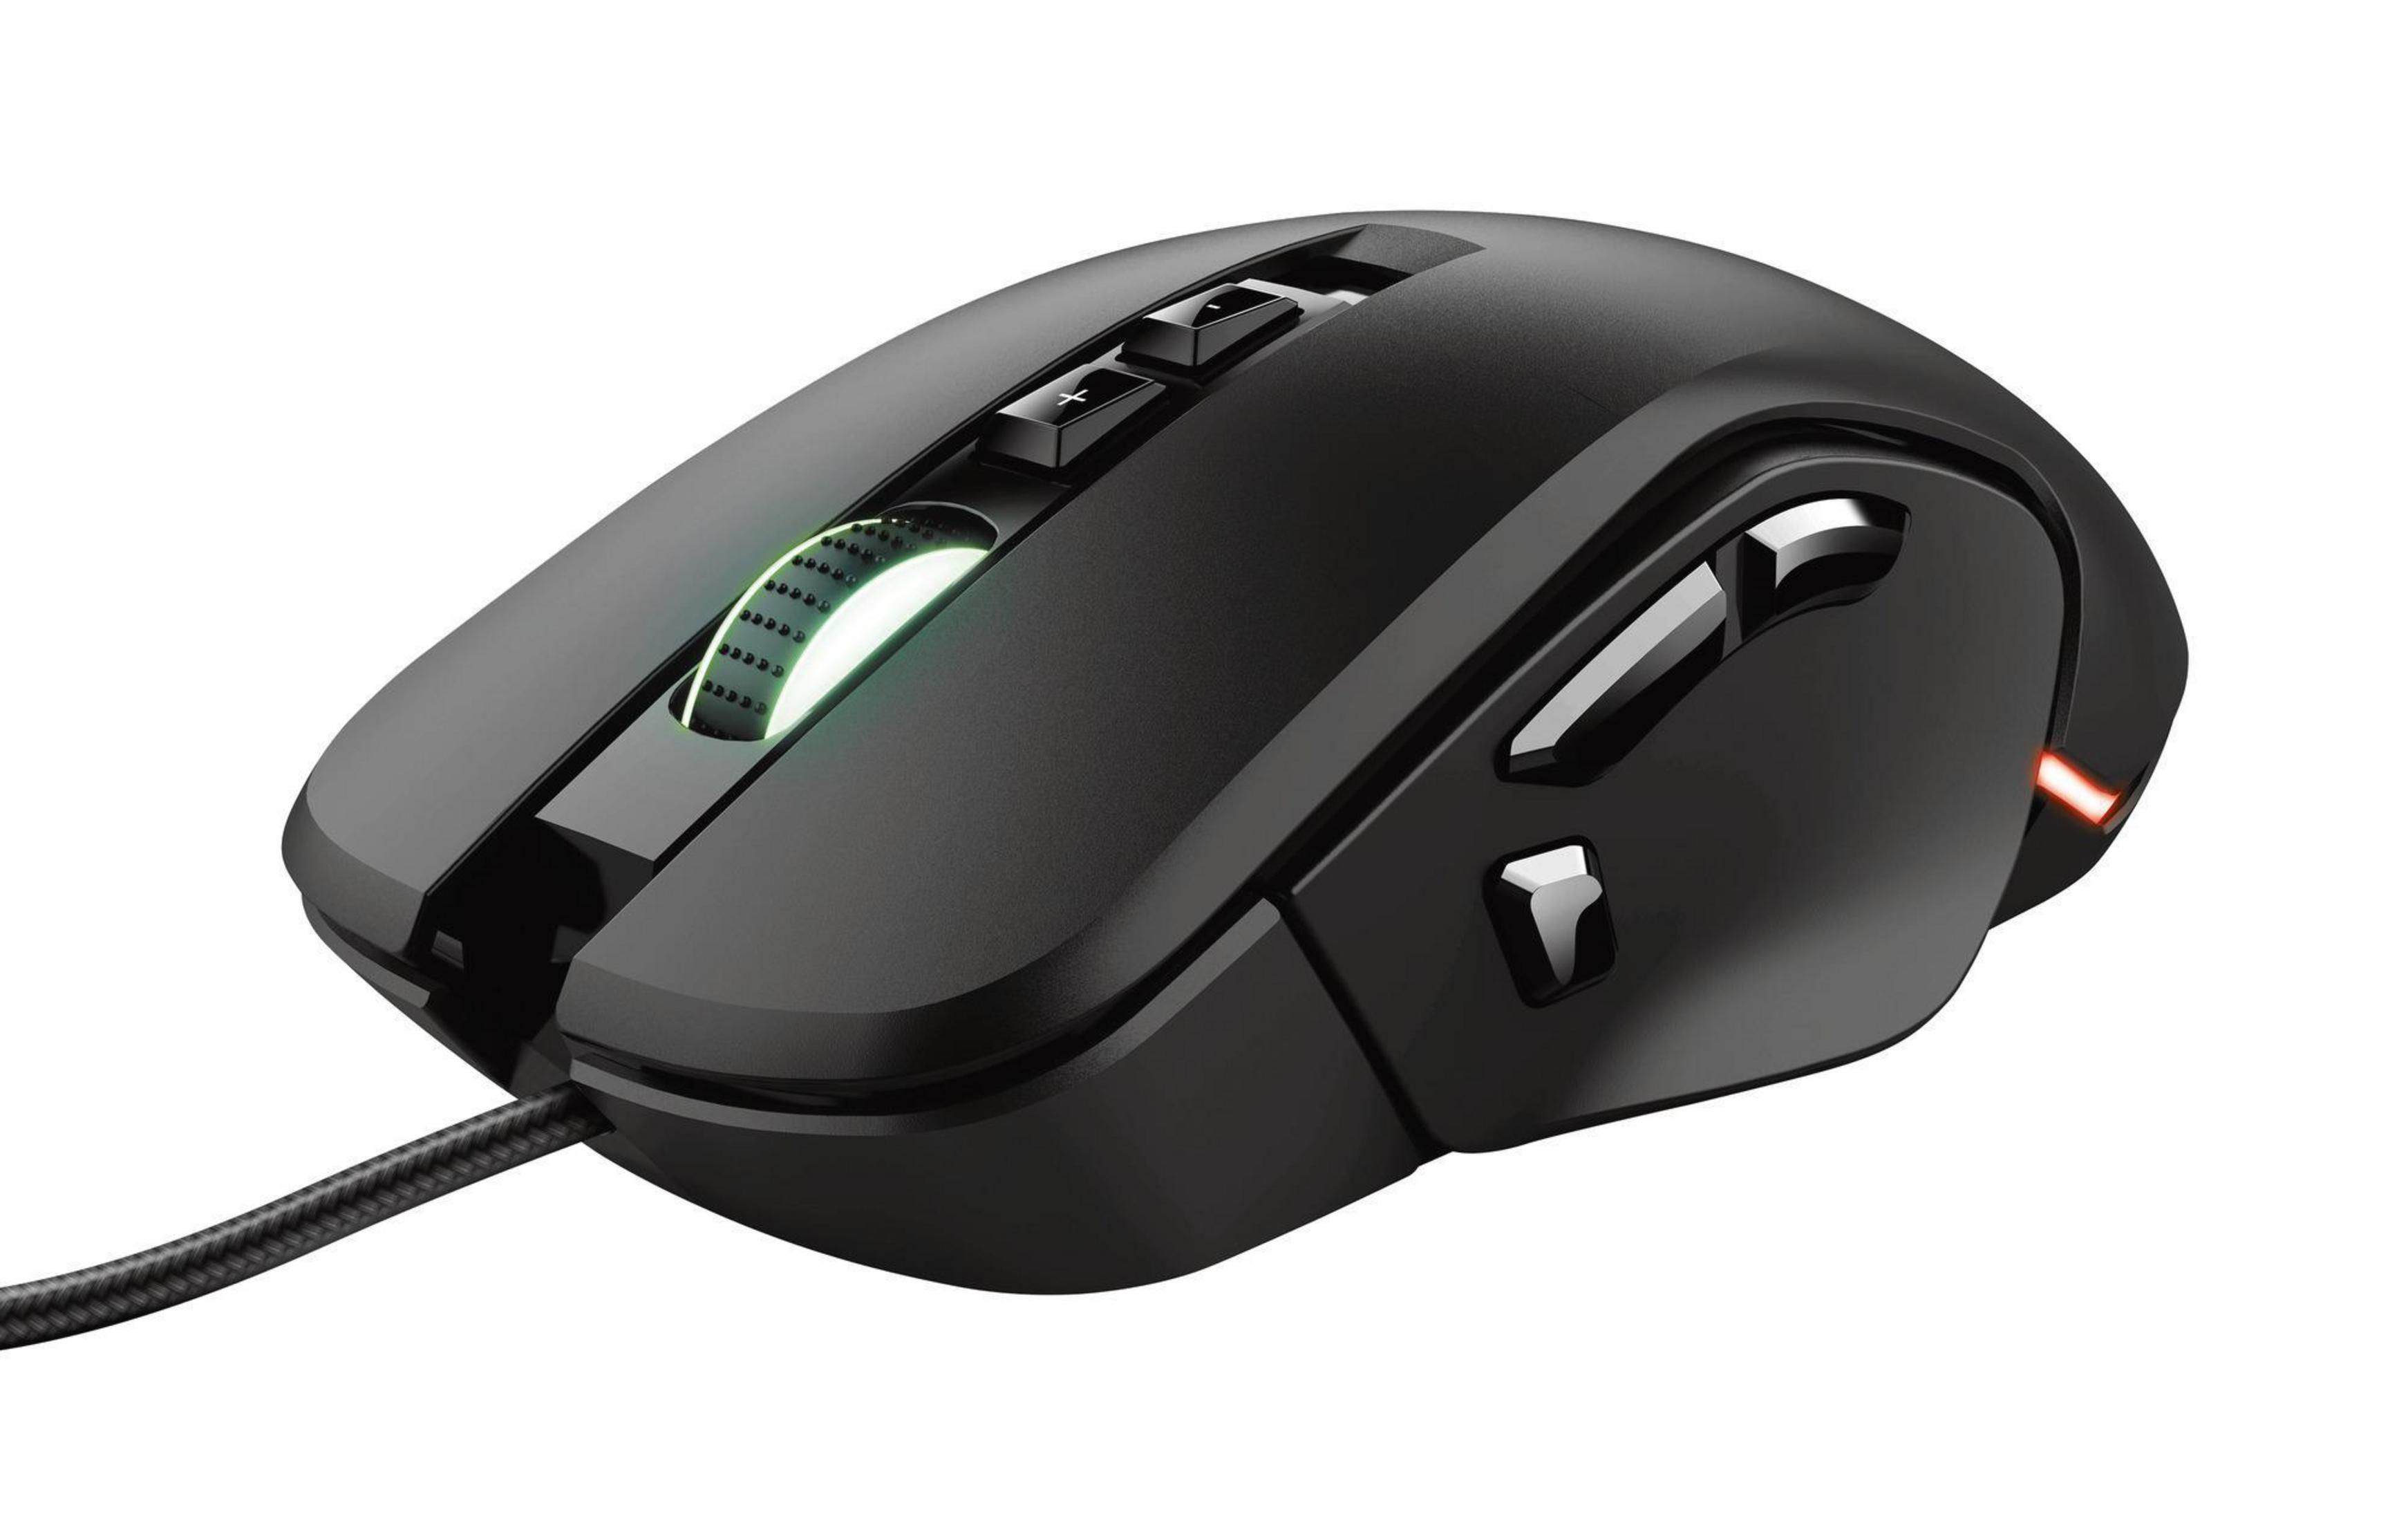 CUSTOMISABLE 970 GXT Schwarz 23764 Maus, MOUSE TRUST Gaming GAMING MORFIX